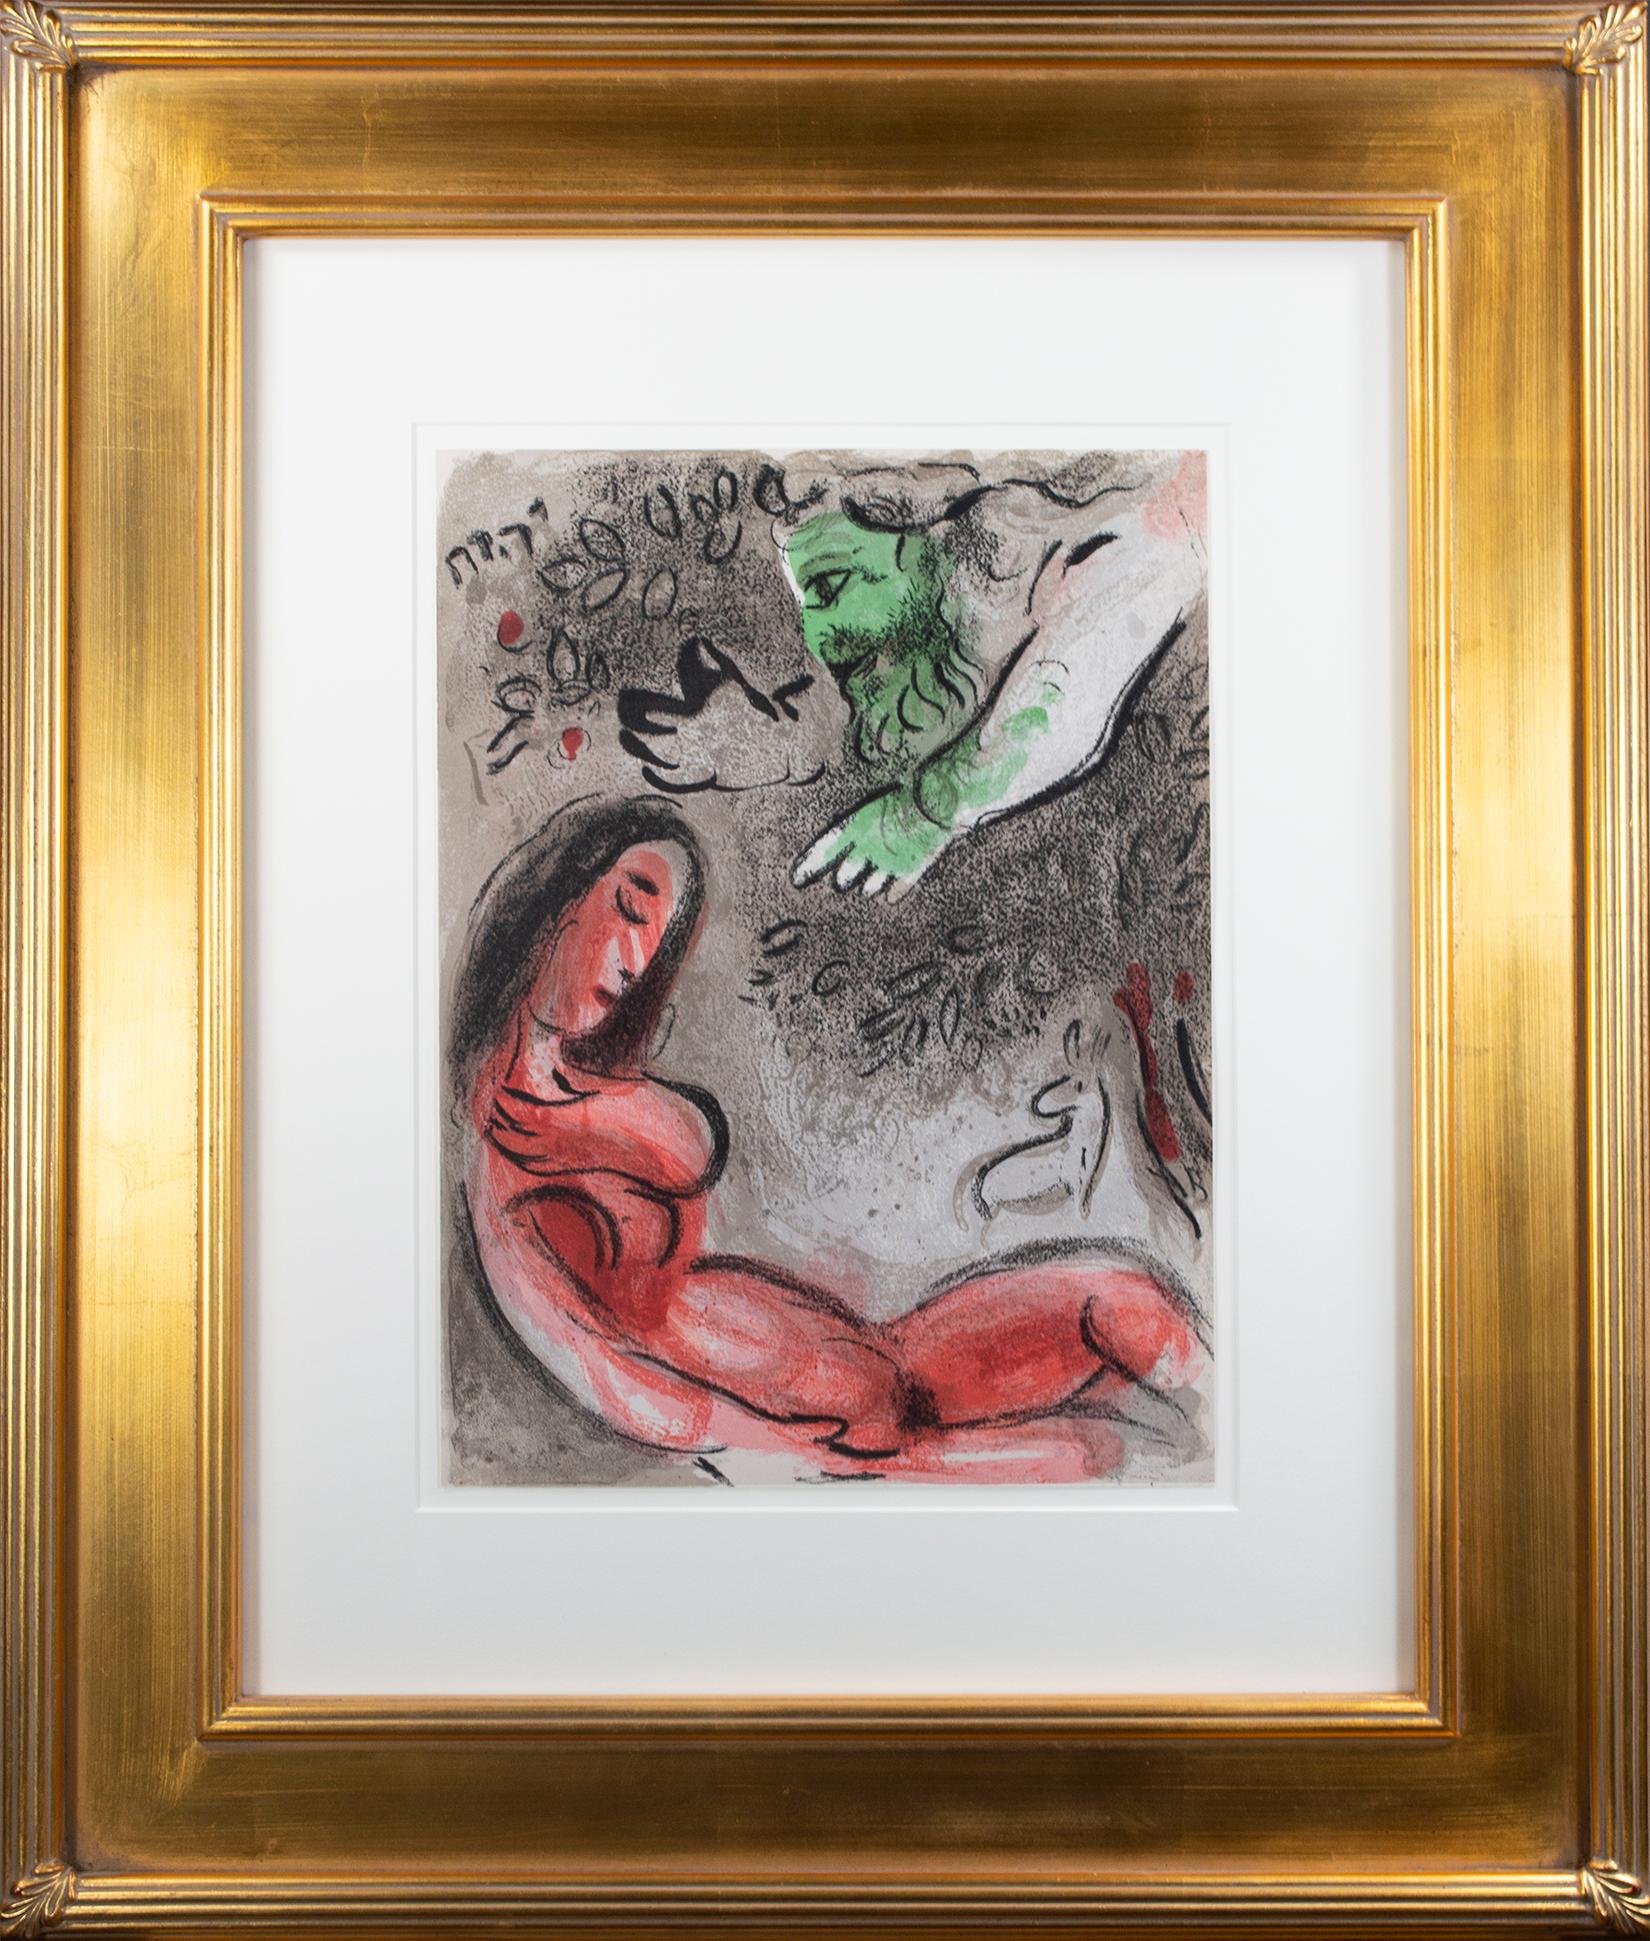 20th century color lithograph nude figures red and green - Surrealist Print by Marc Chagall